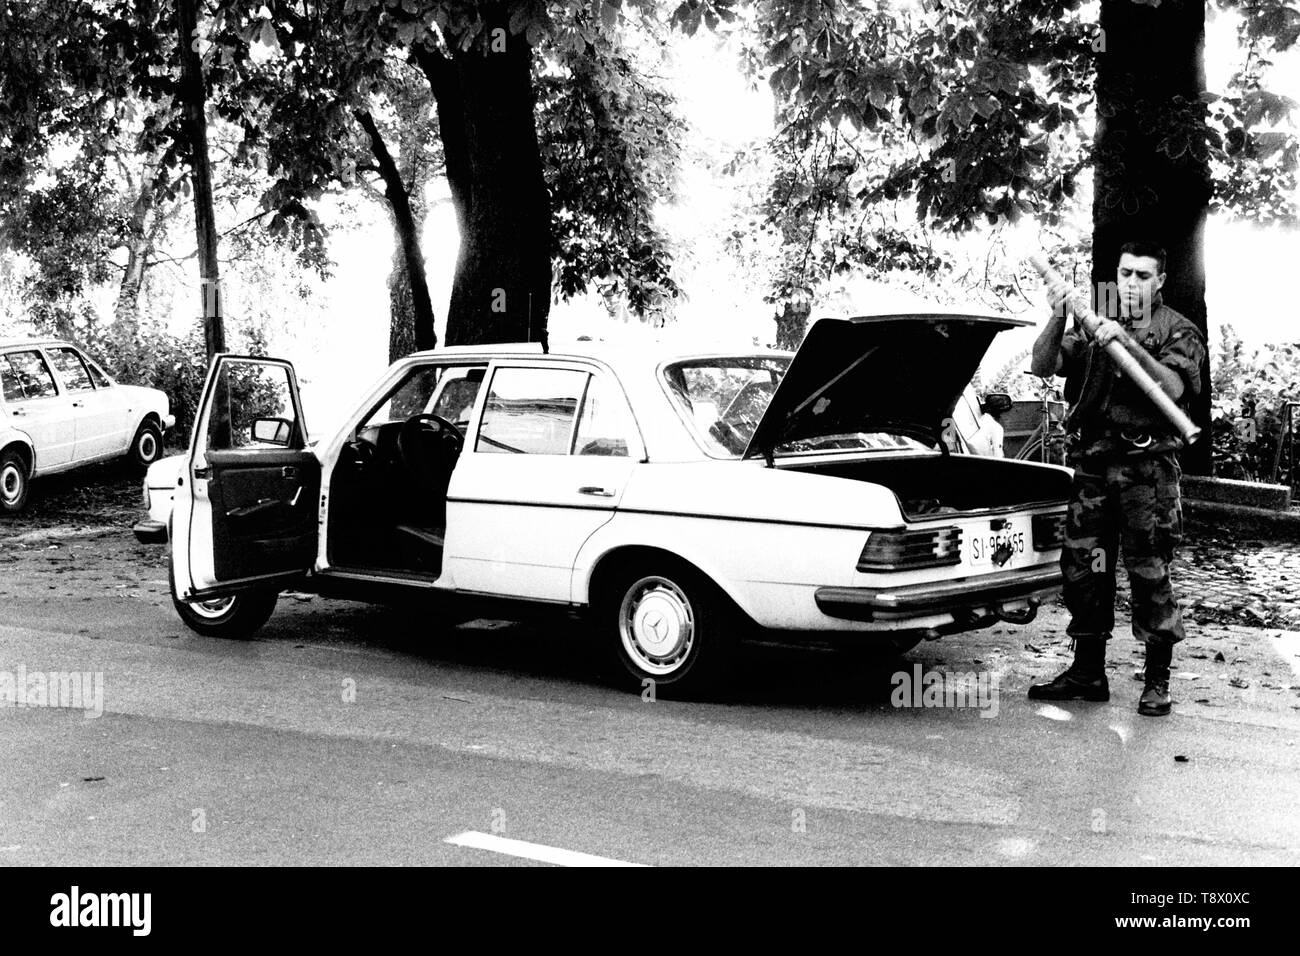 A soldier from the Croatian Defense Forces prepares a rocket launcher from the back of his car to try and shoot down a Yugoslav Federal Army helicopter outside the town of Sisak during the war there in 1991. Picture by Adam Alexander Stock Photo